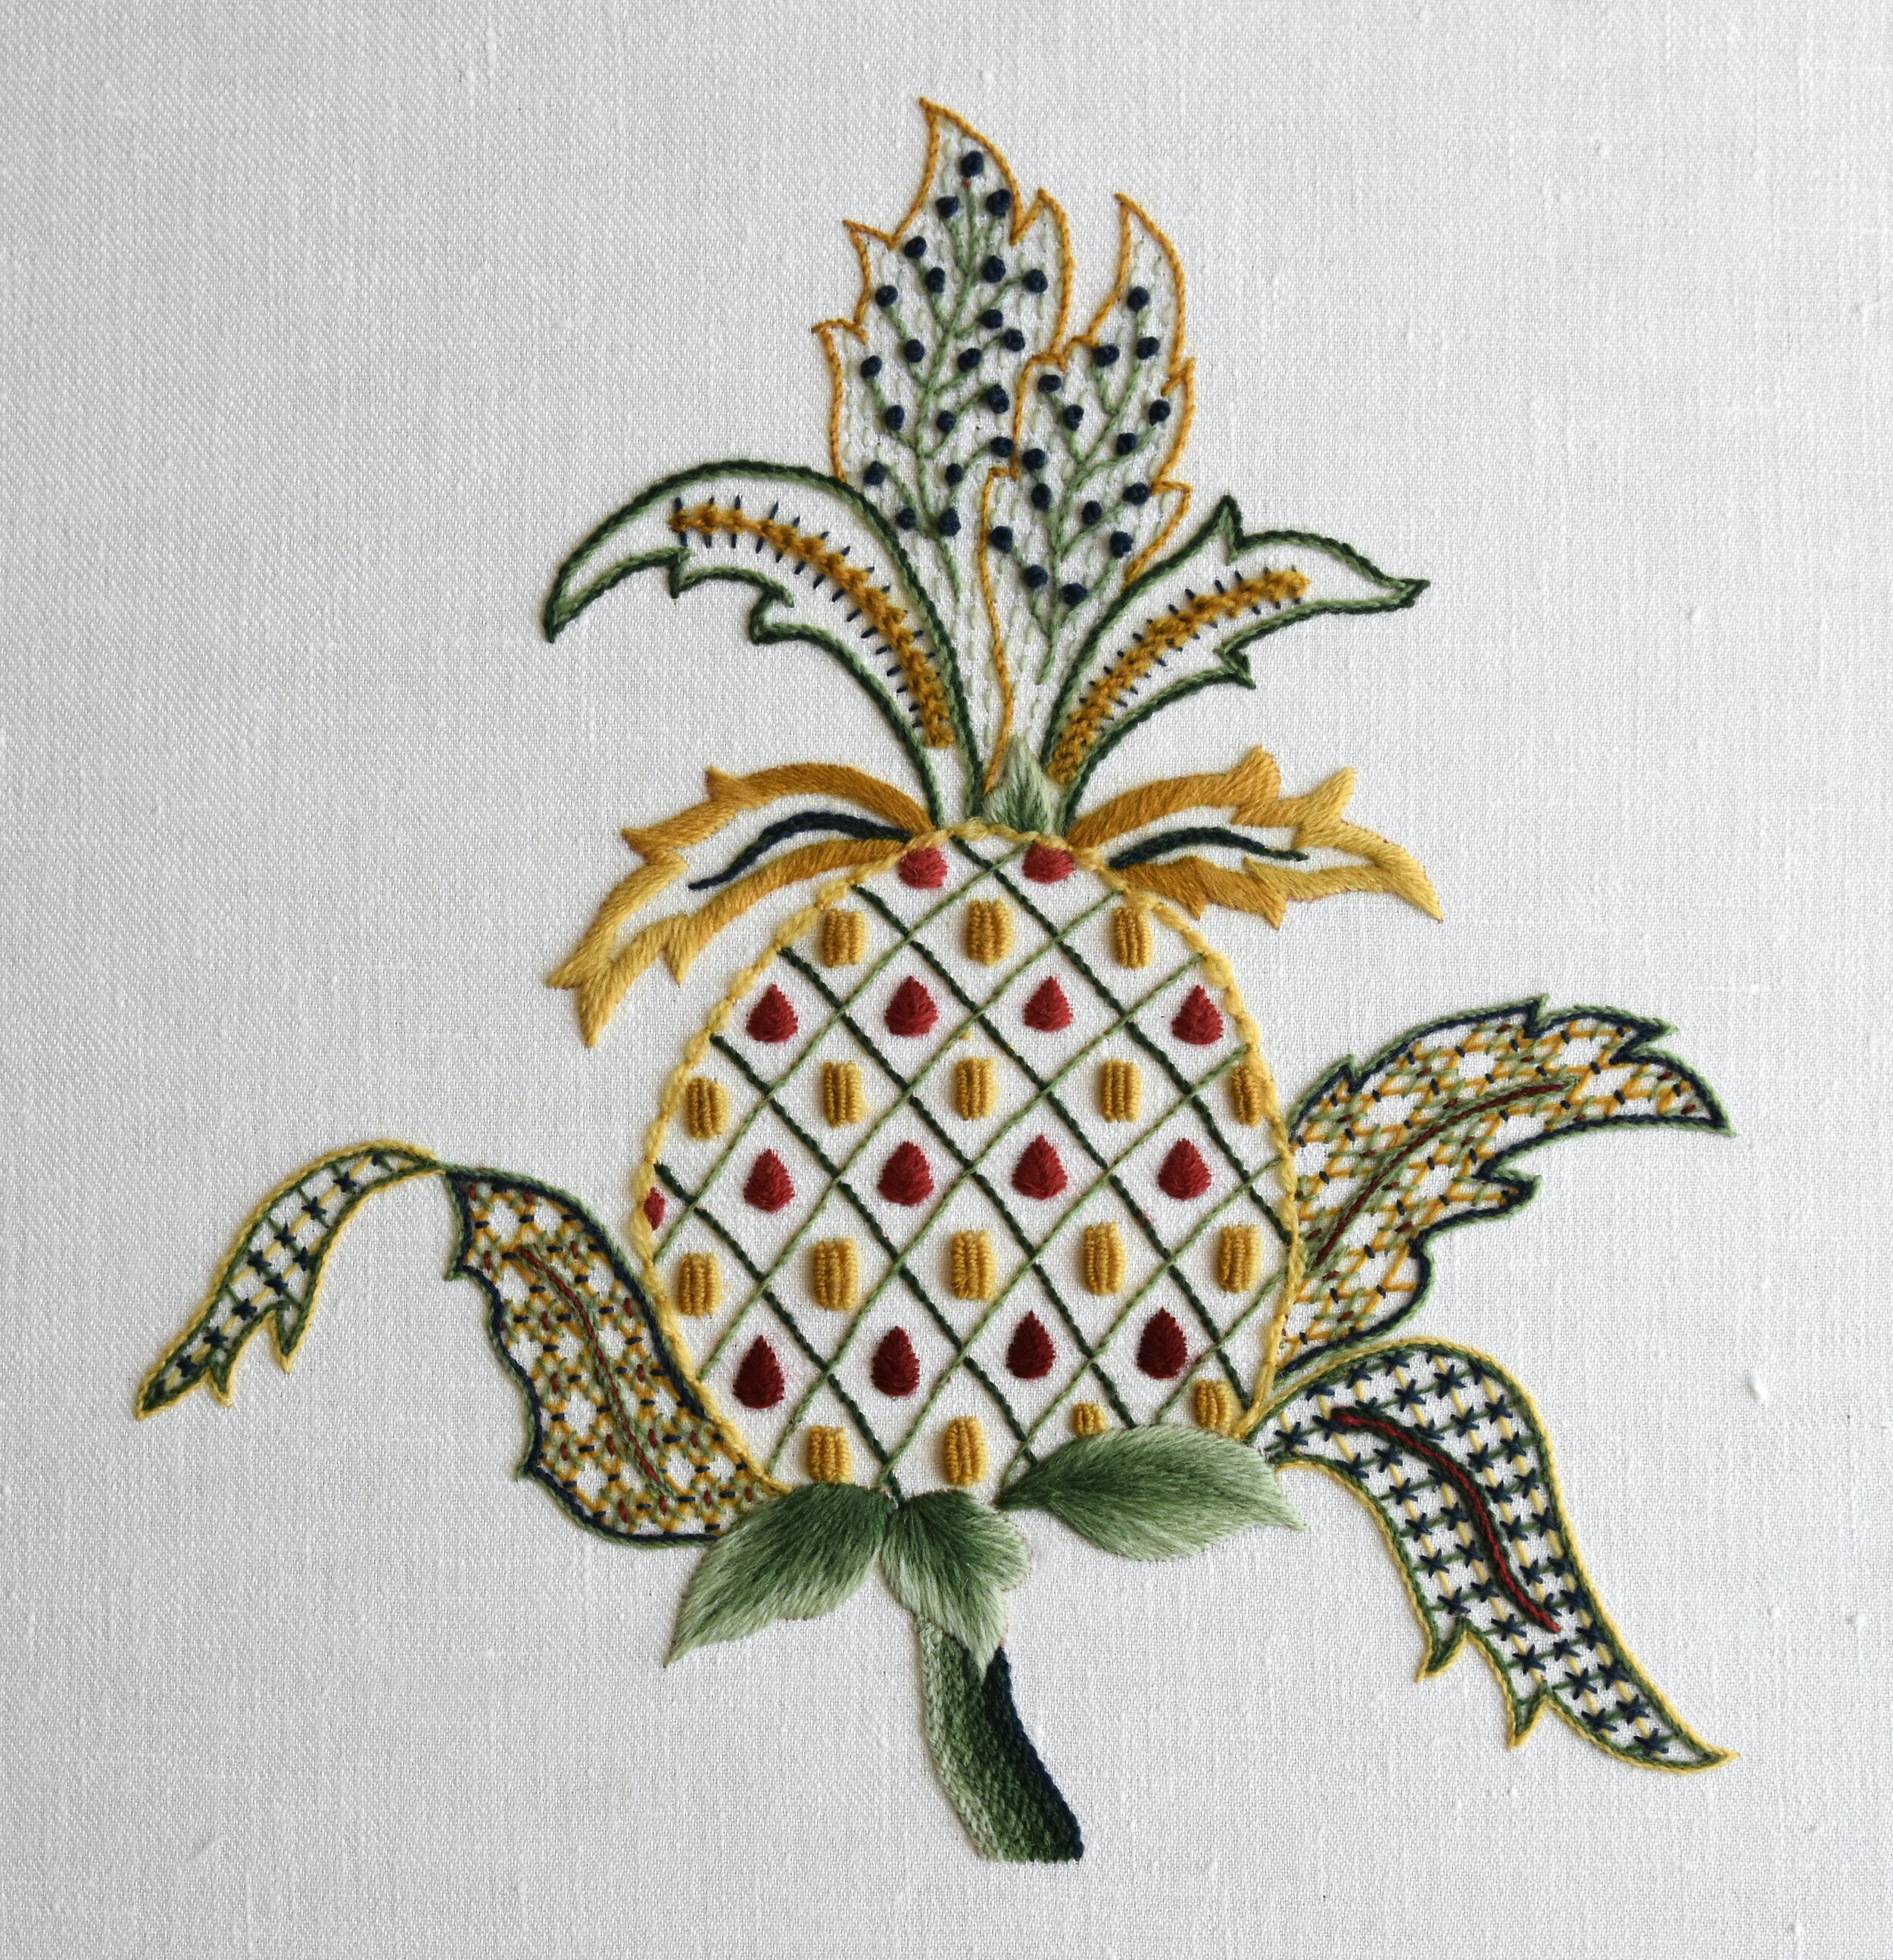 The King's Pineapple